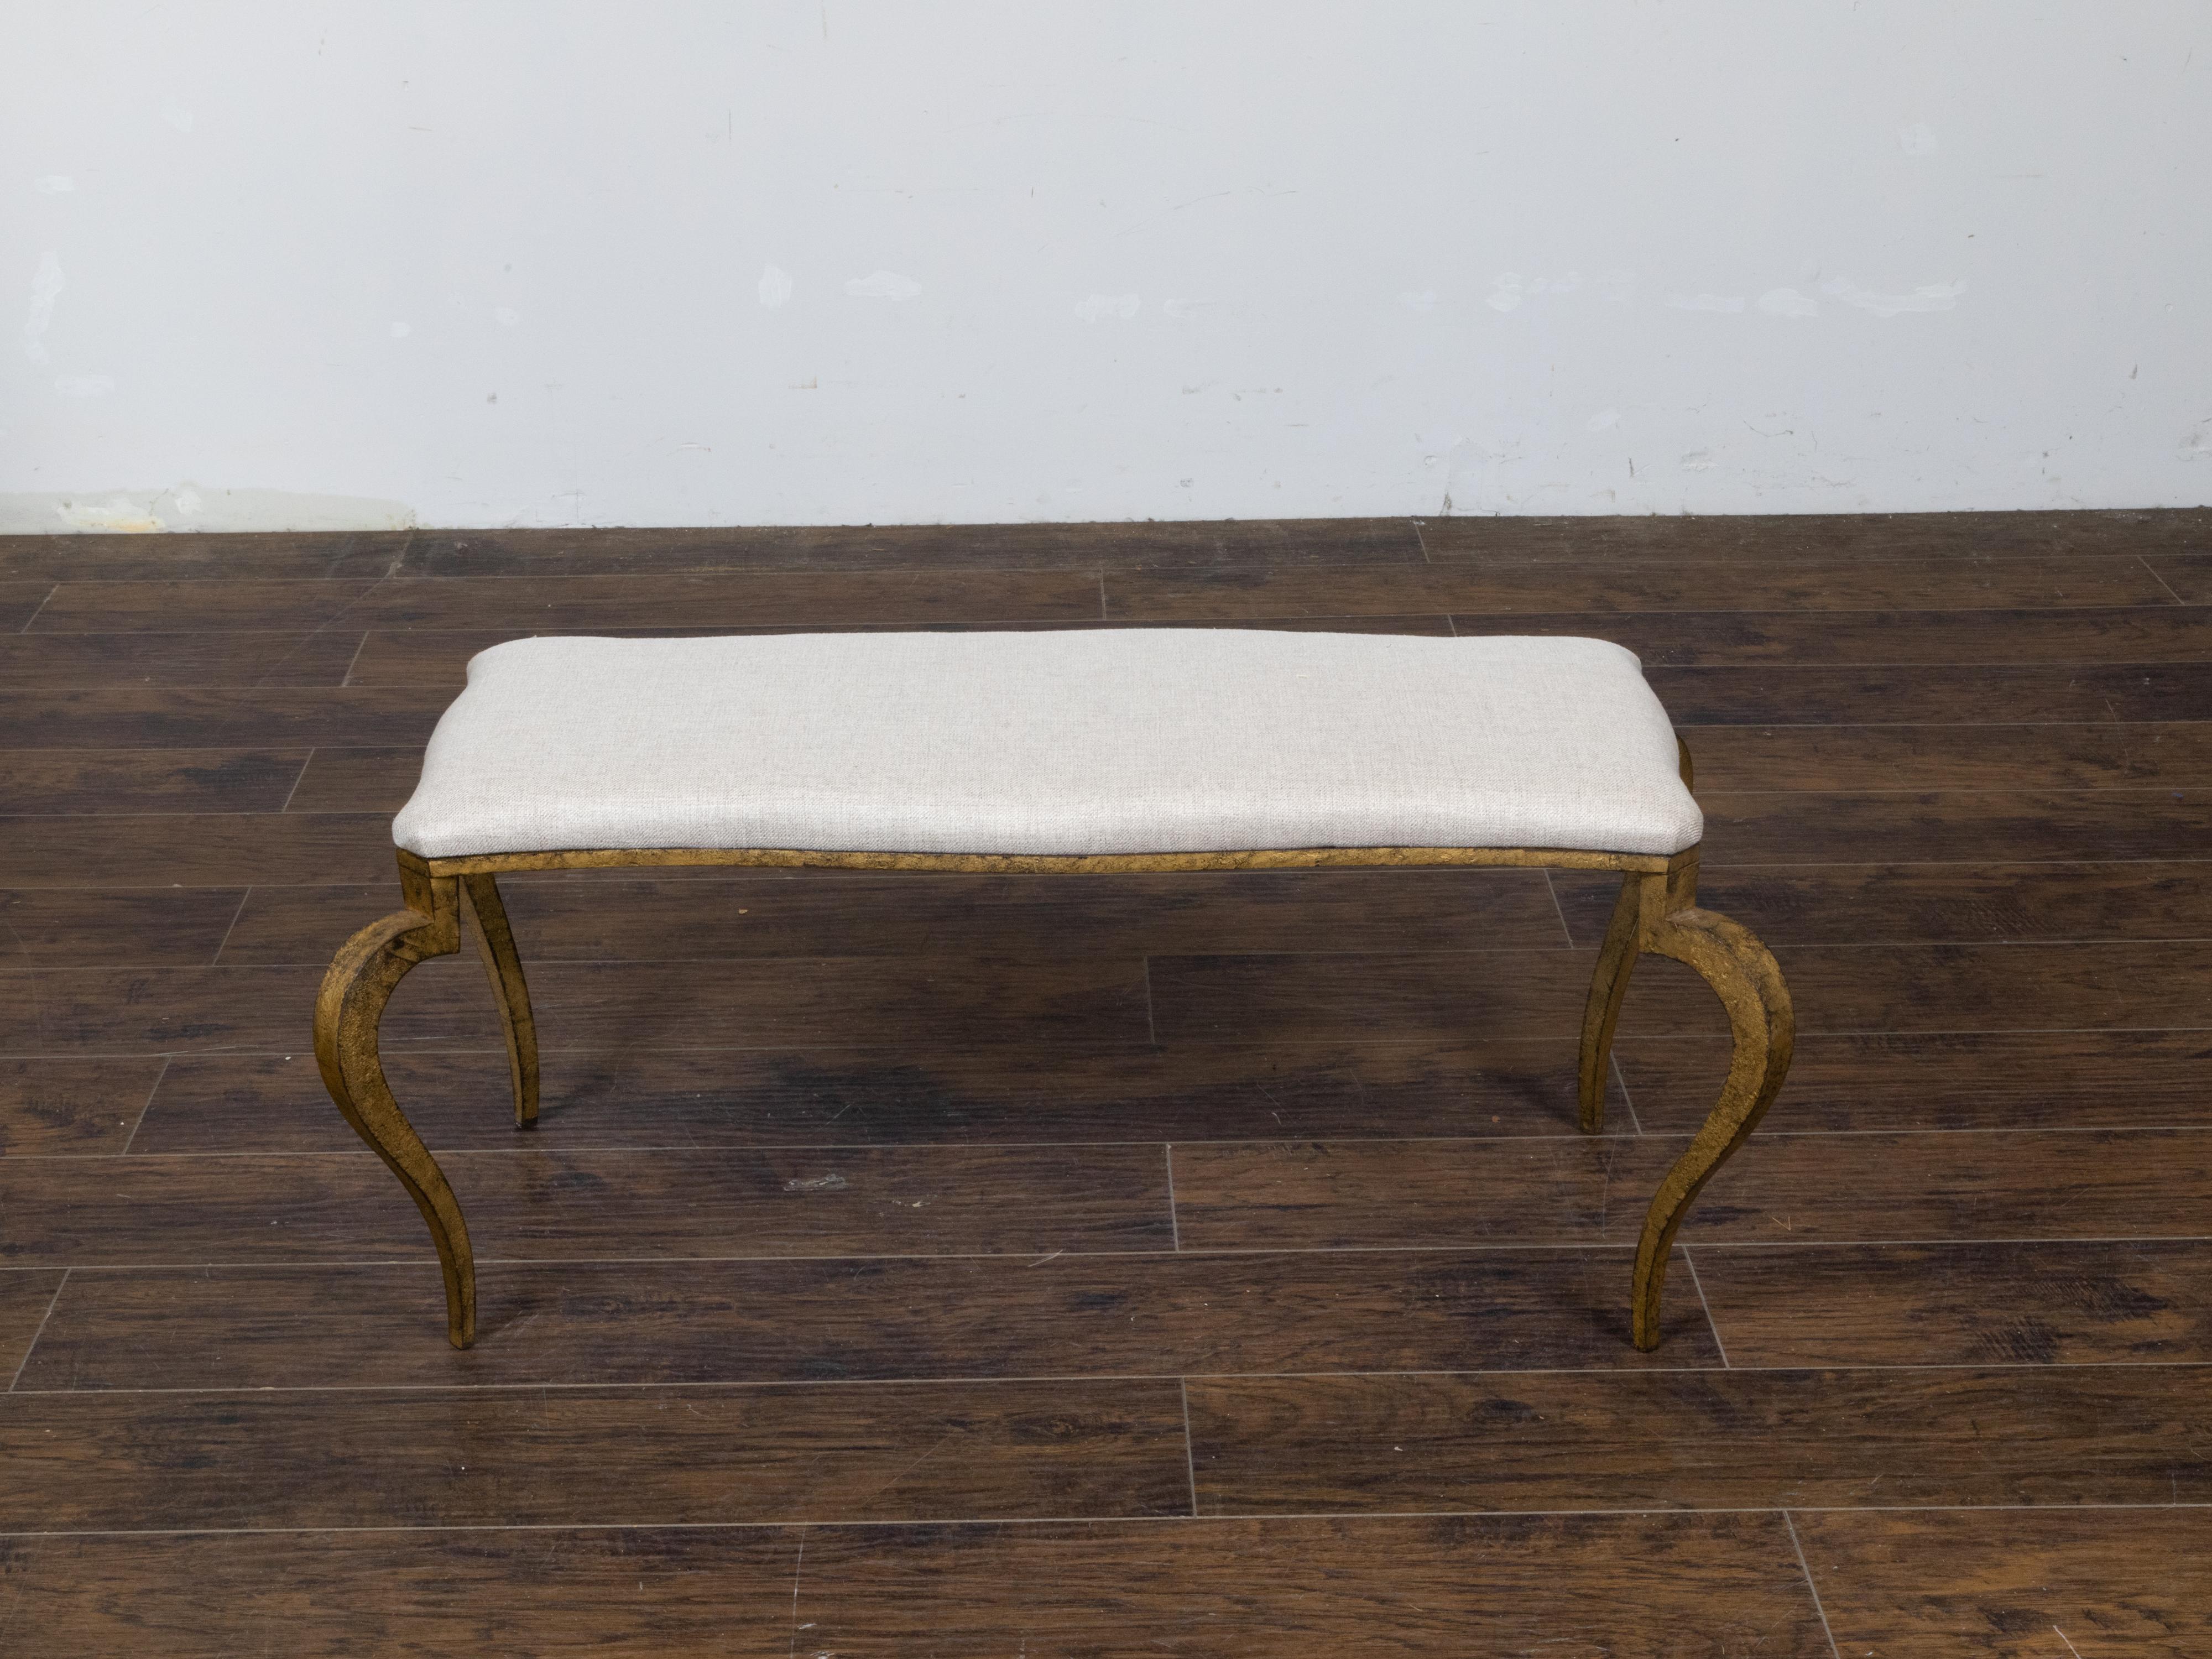 A French Art Deco gilt iron bench circa 1920 with large scrolling and canted legs and rectangular seat newly and professionally reupholstered with a neutral toned linen upholstery. Infuse your interior with a touch of timeless elegance with this